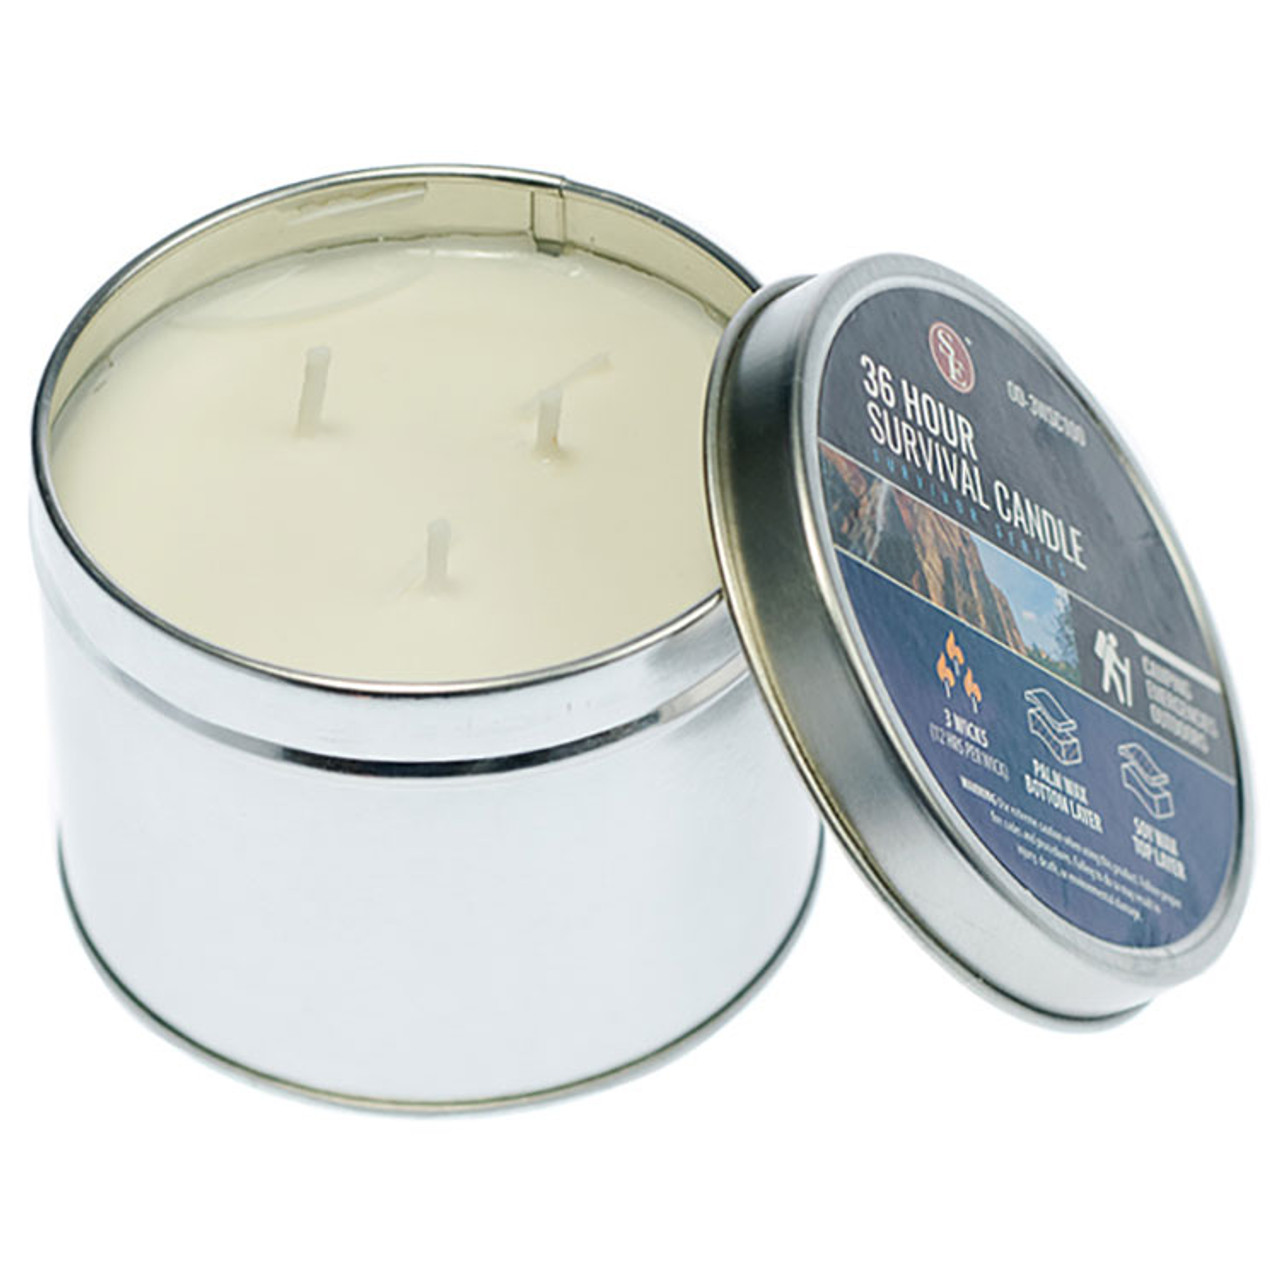 https://cdn11.bigcommerce.com/s-tumf4kk1l4/images/stencil/1280x1280/products/3429/6248/survival-candle-3-wicks-36-total-hours-12-hours-per-wick-15__38995.1640715566.jpg?c=1?imbypass=on